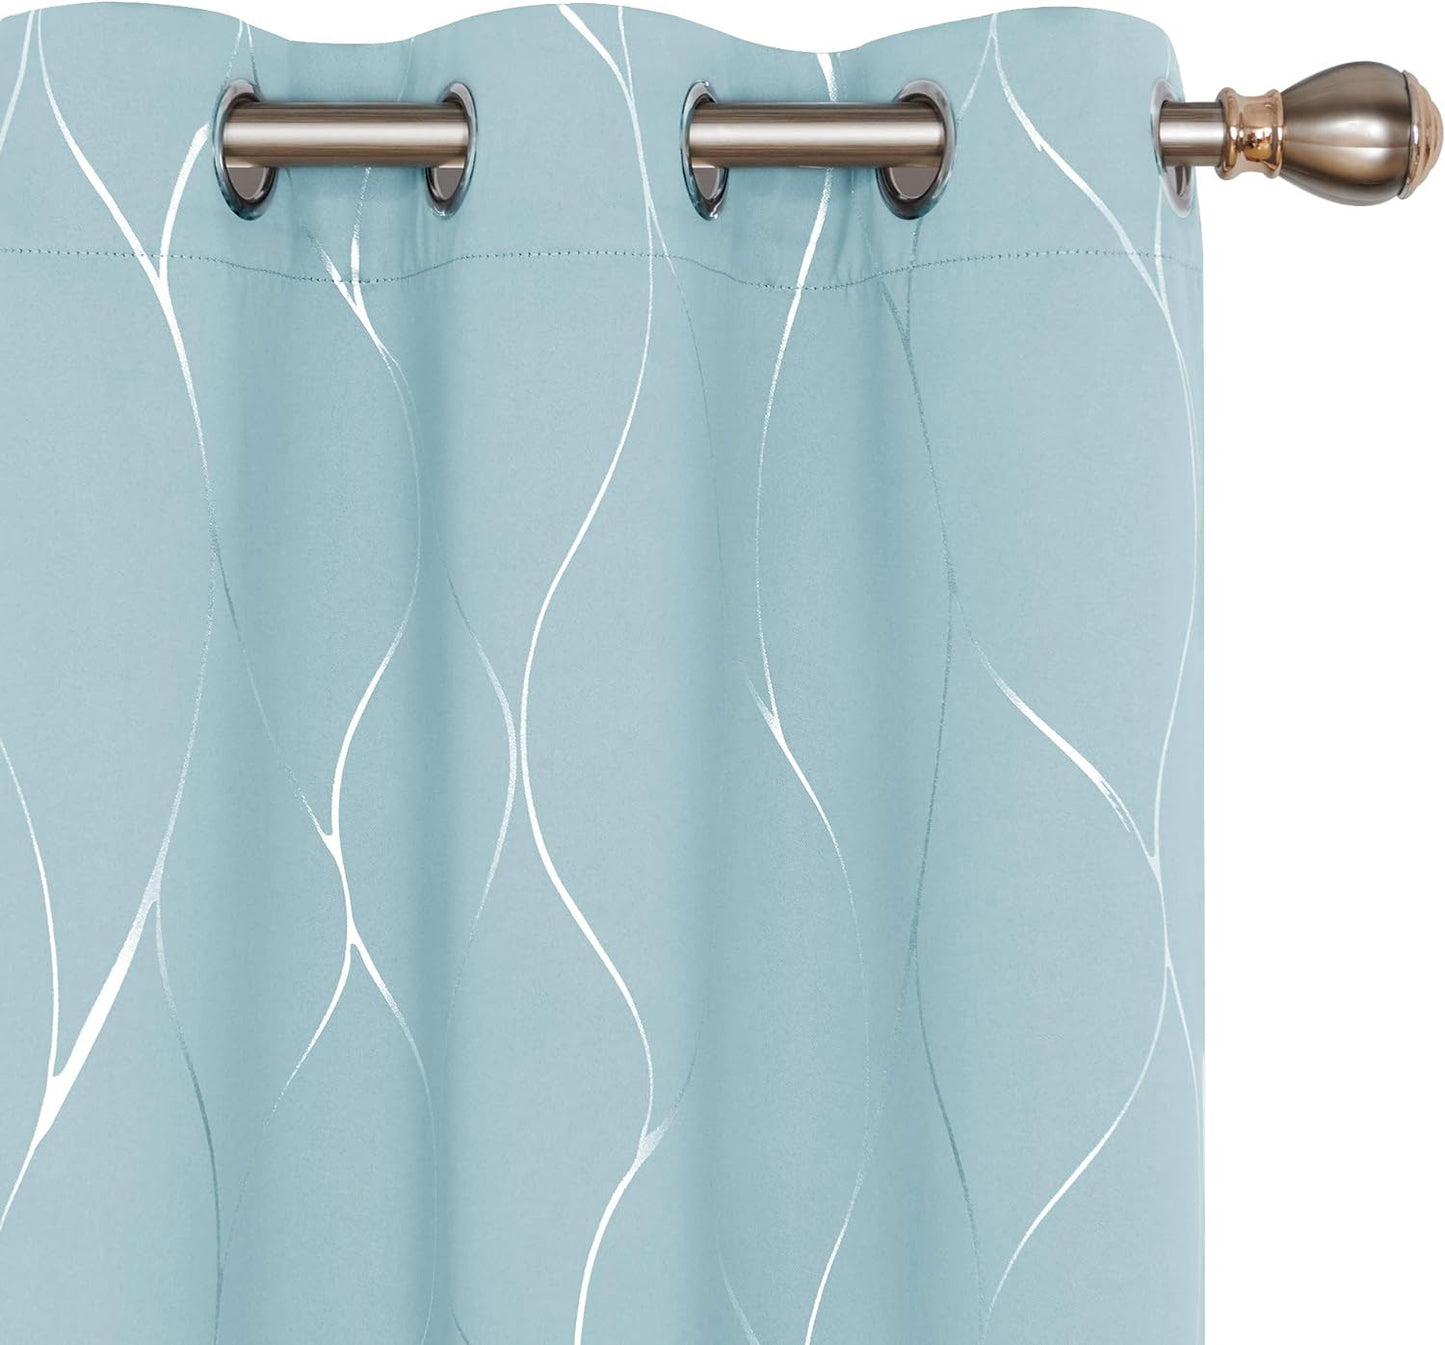 Deconovo Blackout Curtains with Foil Wave Pattern, Grommet Curtain Room Darkening Window Panels, Thermal Insulated Curtain Drapes for Nursery Room (42W X 54L Inch, 2 Panels, Turquoise)  DECONOVO Sky Blue W42 X L108 